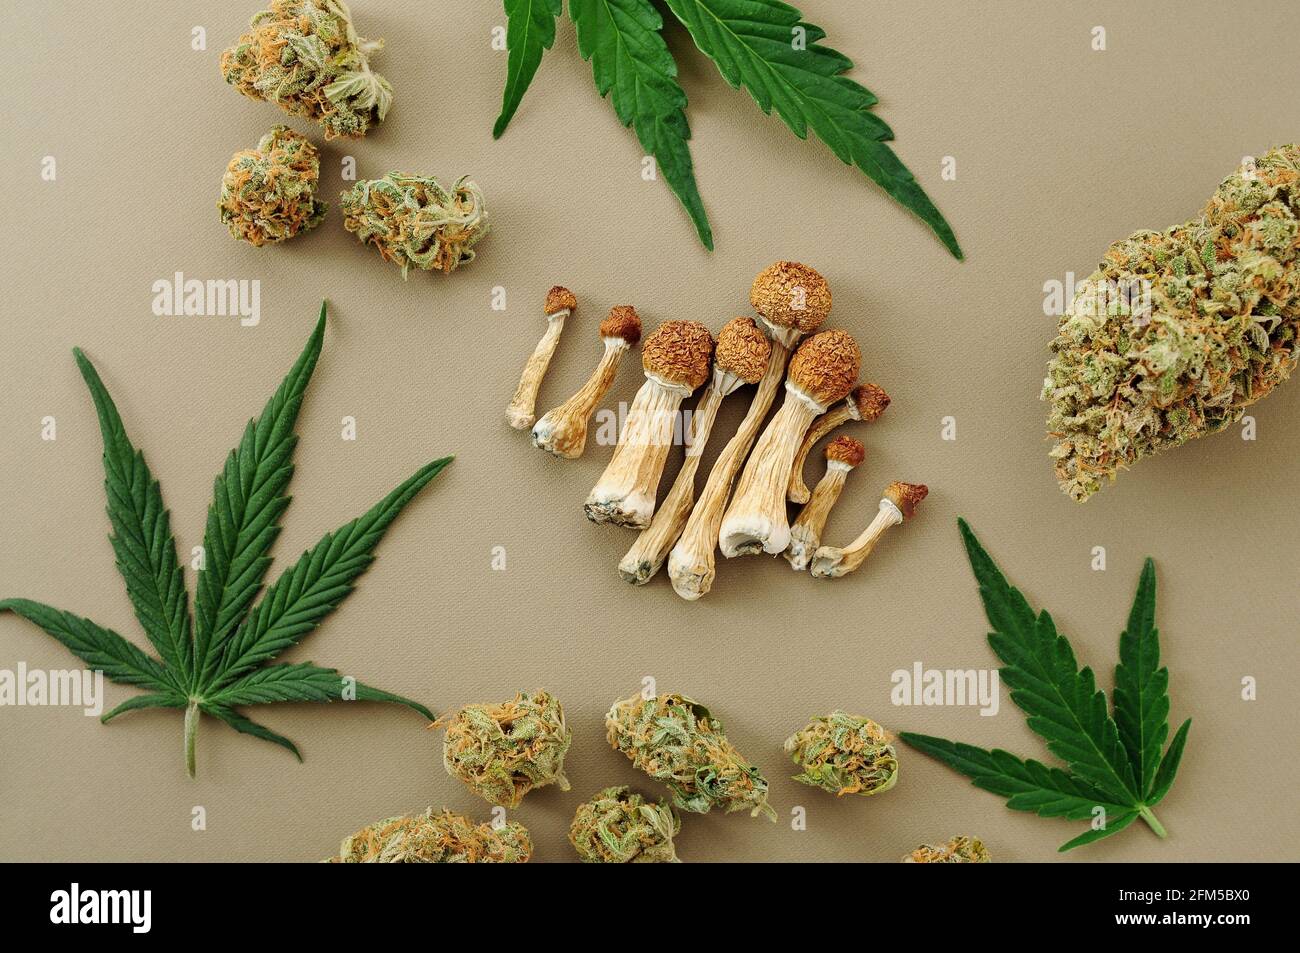 Psychedelic trip, CBD recreation. Micro-dosing concept. Dried psilocybe mushrooms, cannabis buds, marijuana leaves on ivory background. Stock Photo